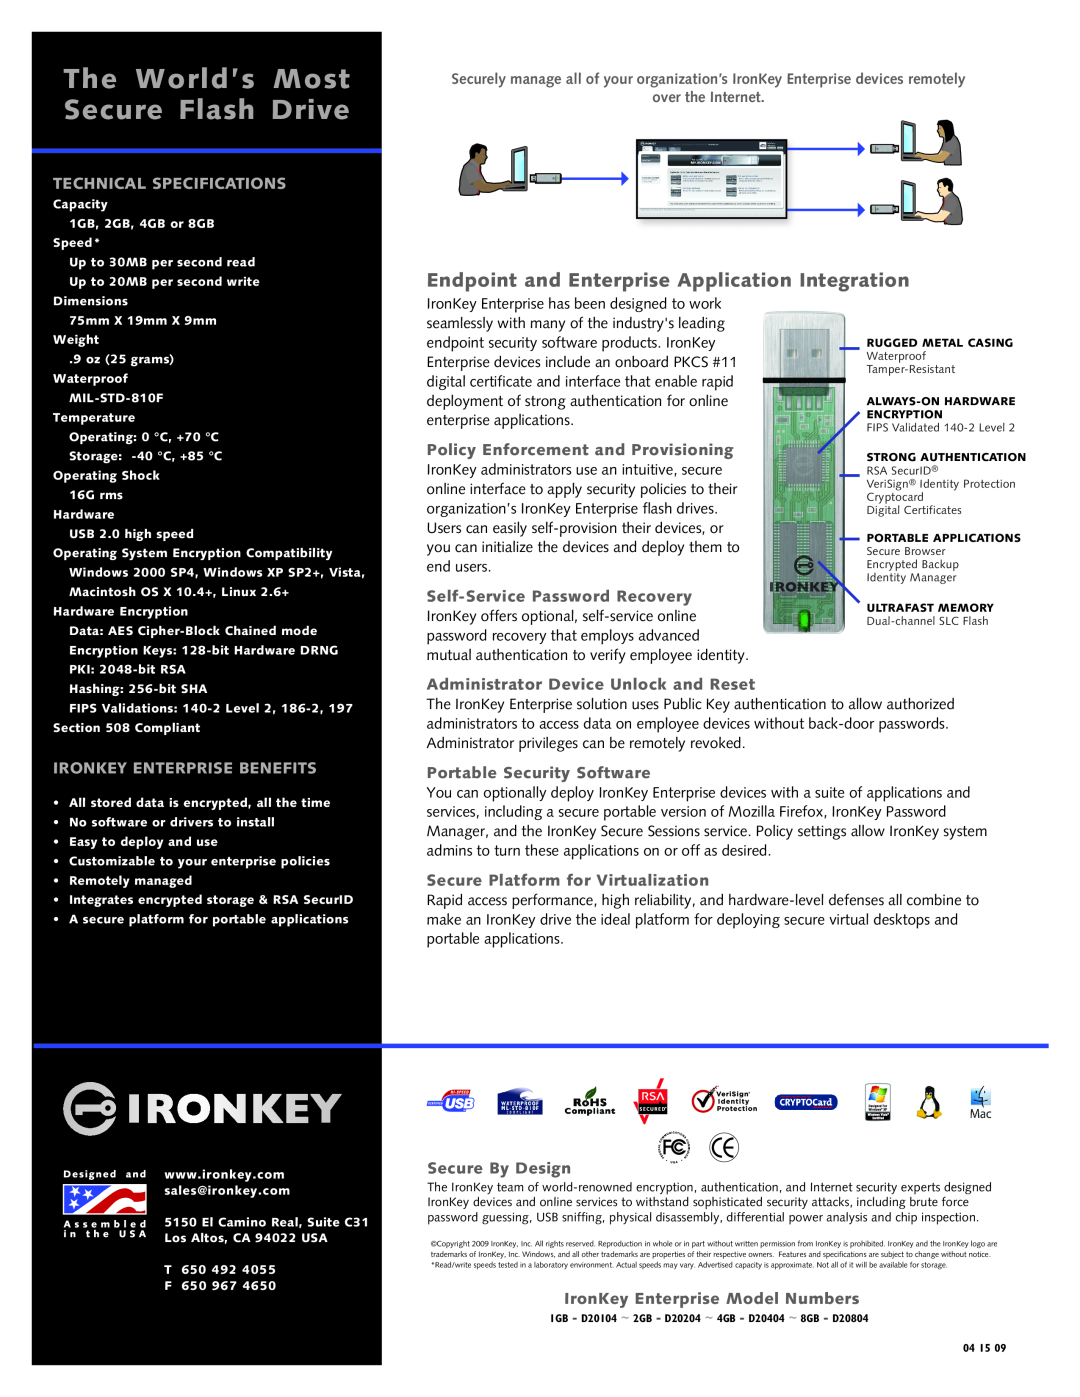 IronKey USB Flash Drives manual Endpoint and Enterprise Application Integration, Policy Enforcement and Provisioning 